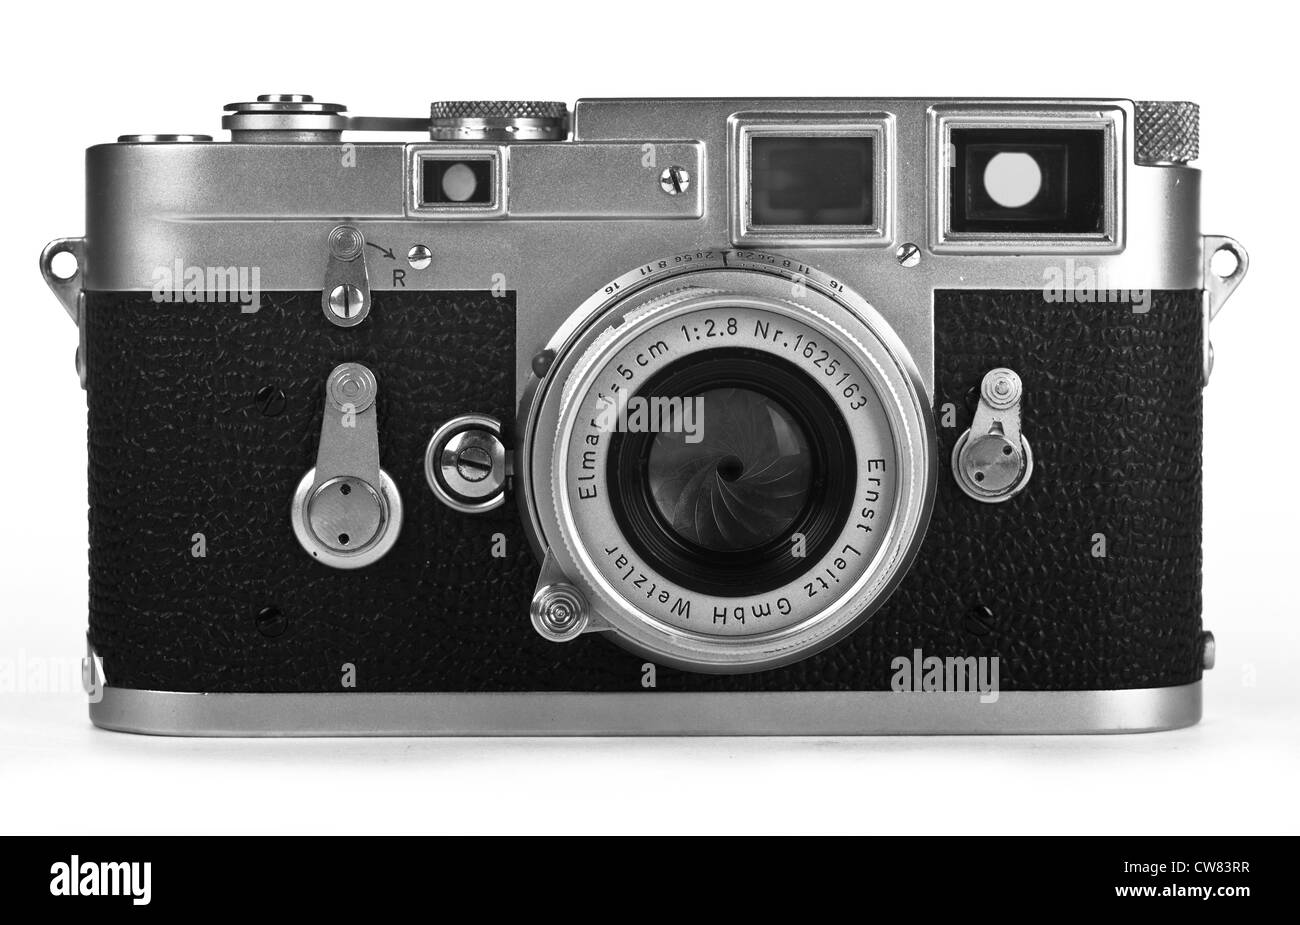 Leica M3 Leitz Rangefinder camera on White Background with Collapsible Elmar 50mm f2.8 M Lens B & W Stock Photo